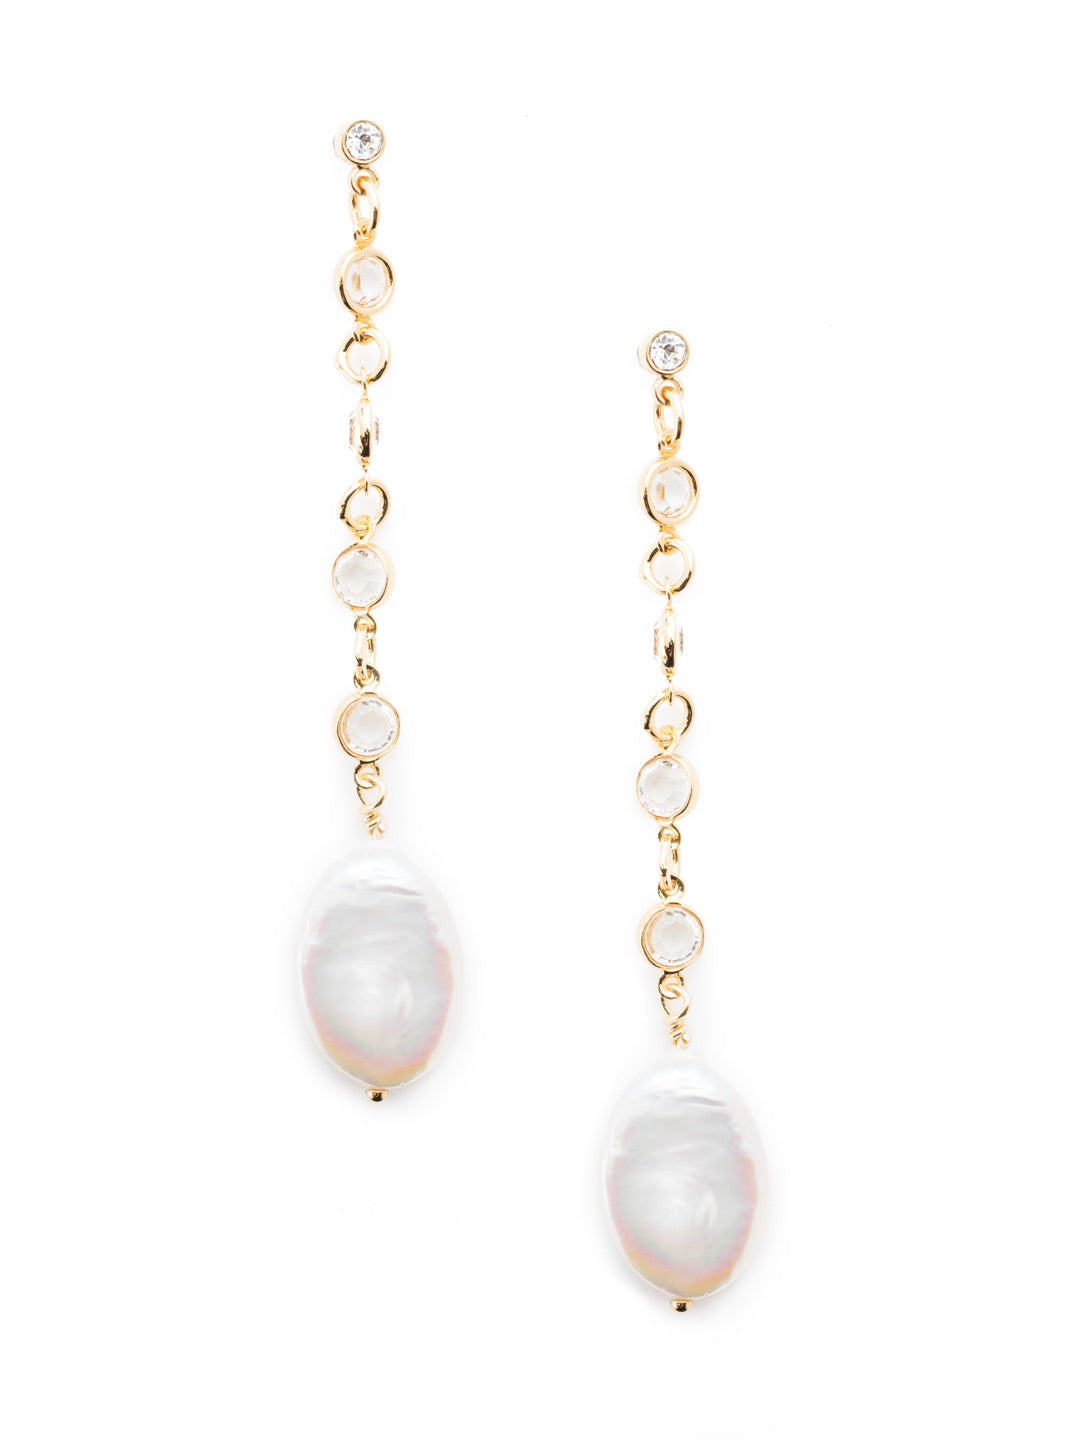 Fernanda Dangle Earrings - EET82BGMDP - <p>A delicate chain with beautiful clear gems that gradually descends a freshwater pearl. These earrings offer a hint of elegance. From Sorrelli's Modern Pearl collection in our Bright Gold-tone finish.</p>